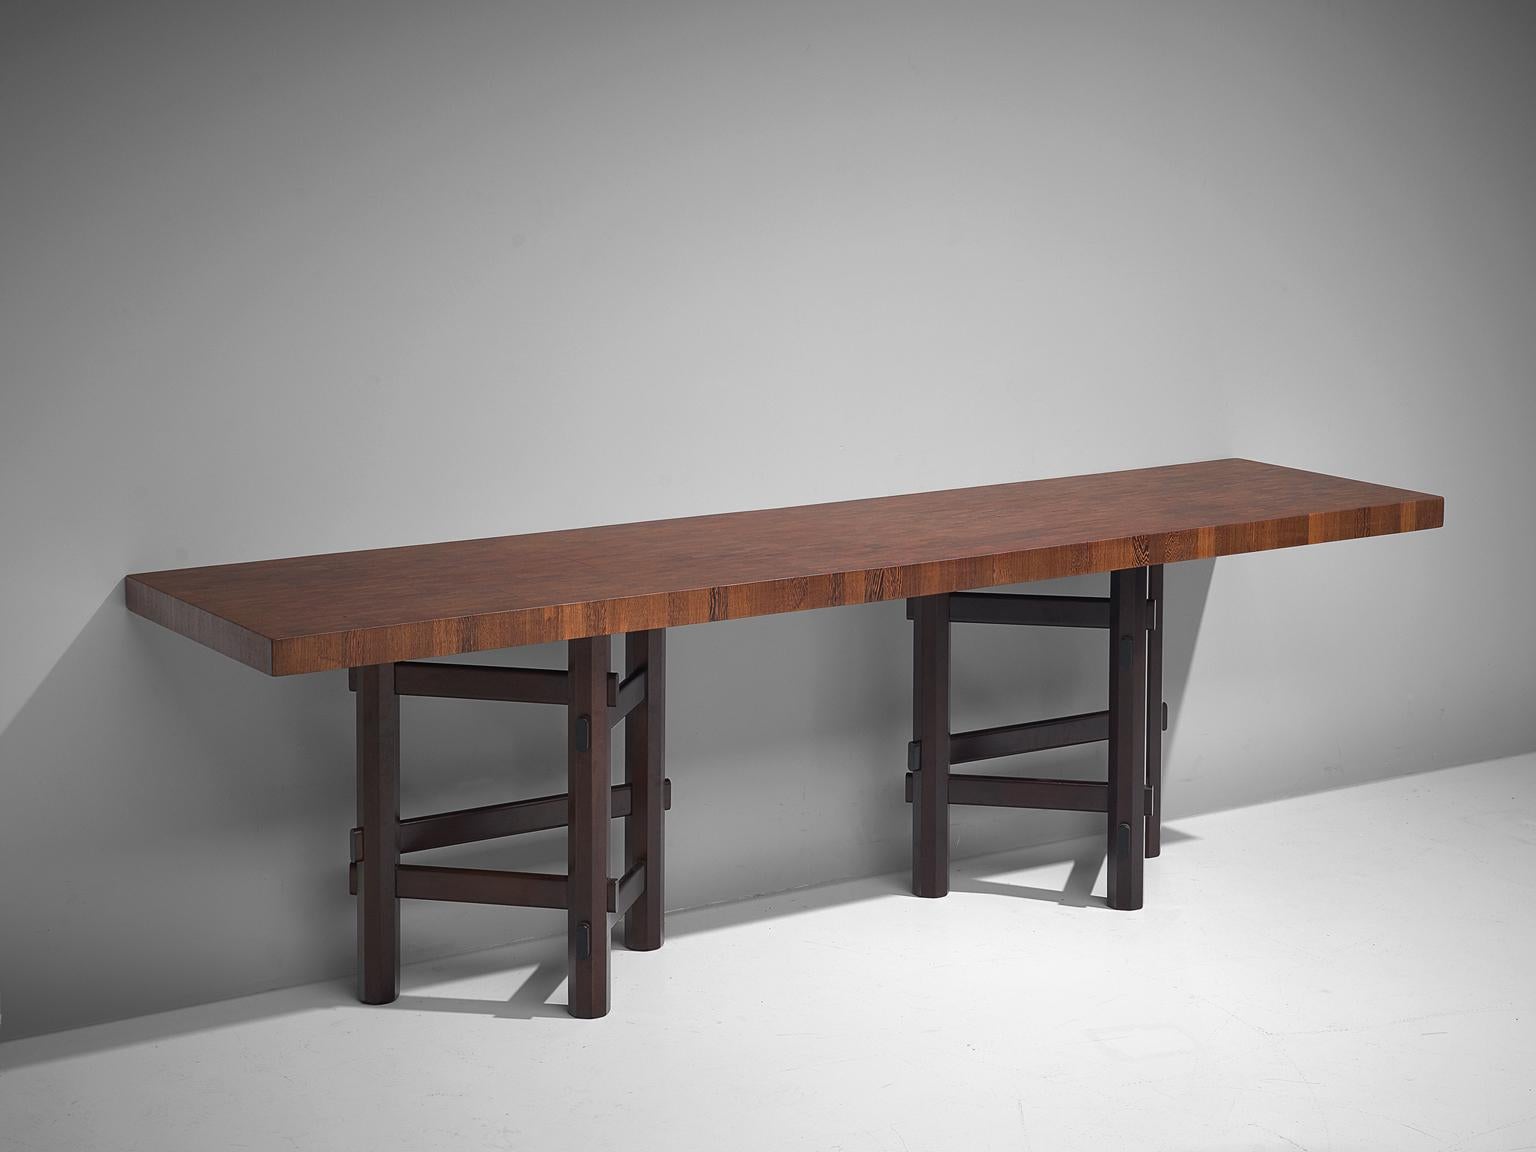 Jan Vlug, console, wengé and mahogany, Belgium, 1970s

Rare and exclusive console table with characteristic graphical base and stunning made table top. The base is made of lacquered mahogany wood. It consists of two elements, build up from 3 legs